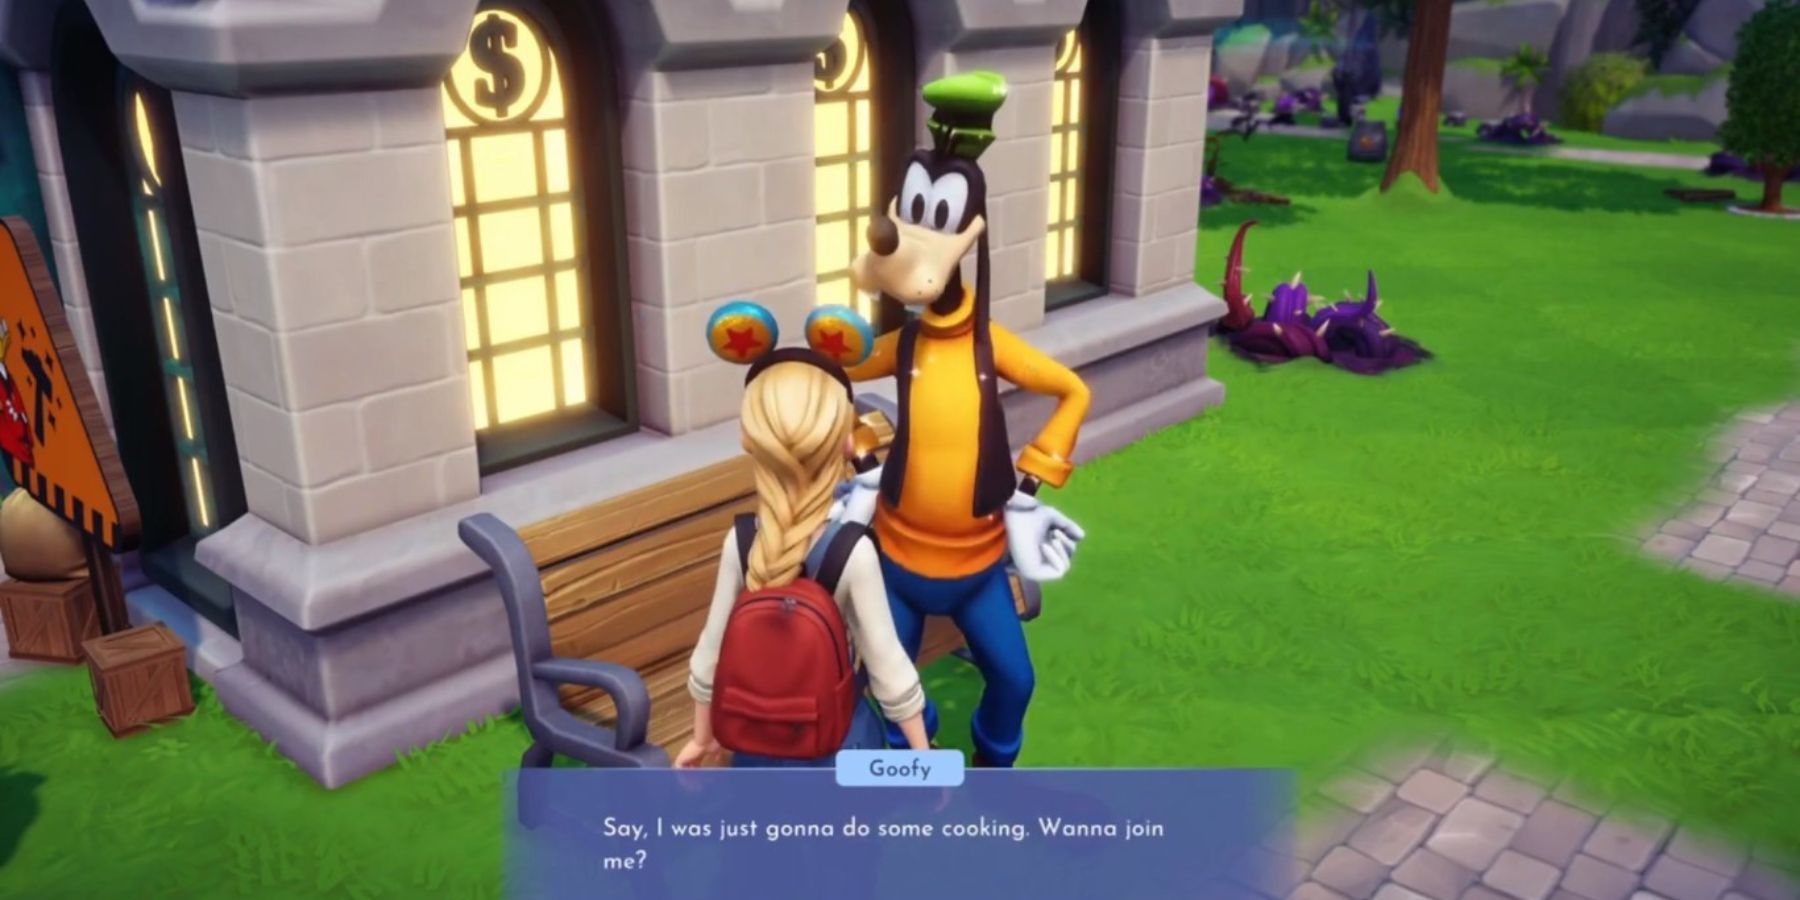 goofy inviting players to cook disney dreamlight valley